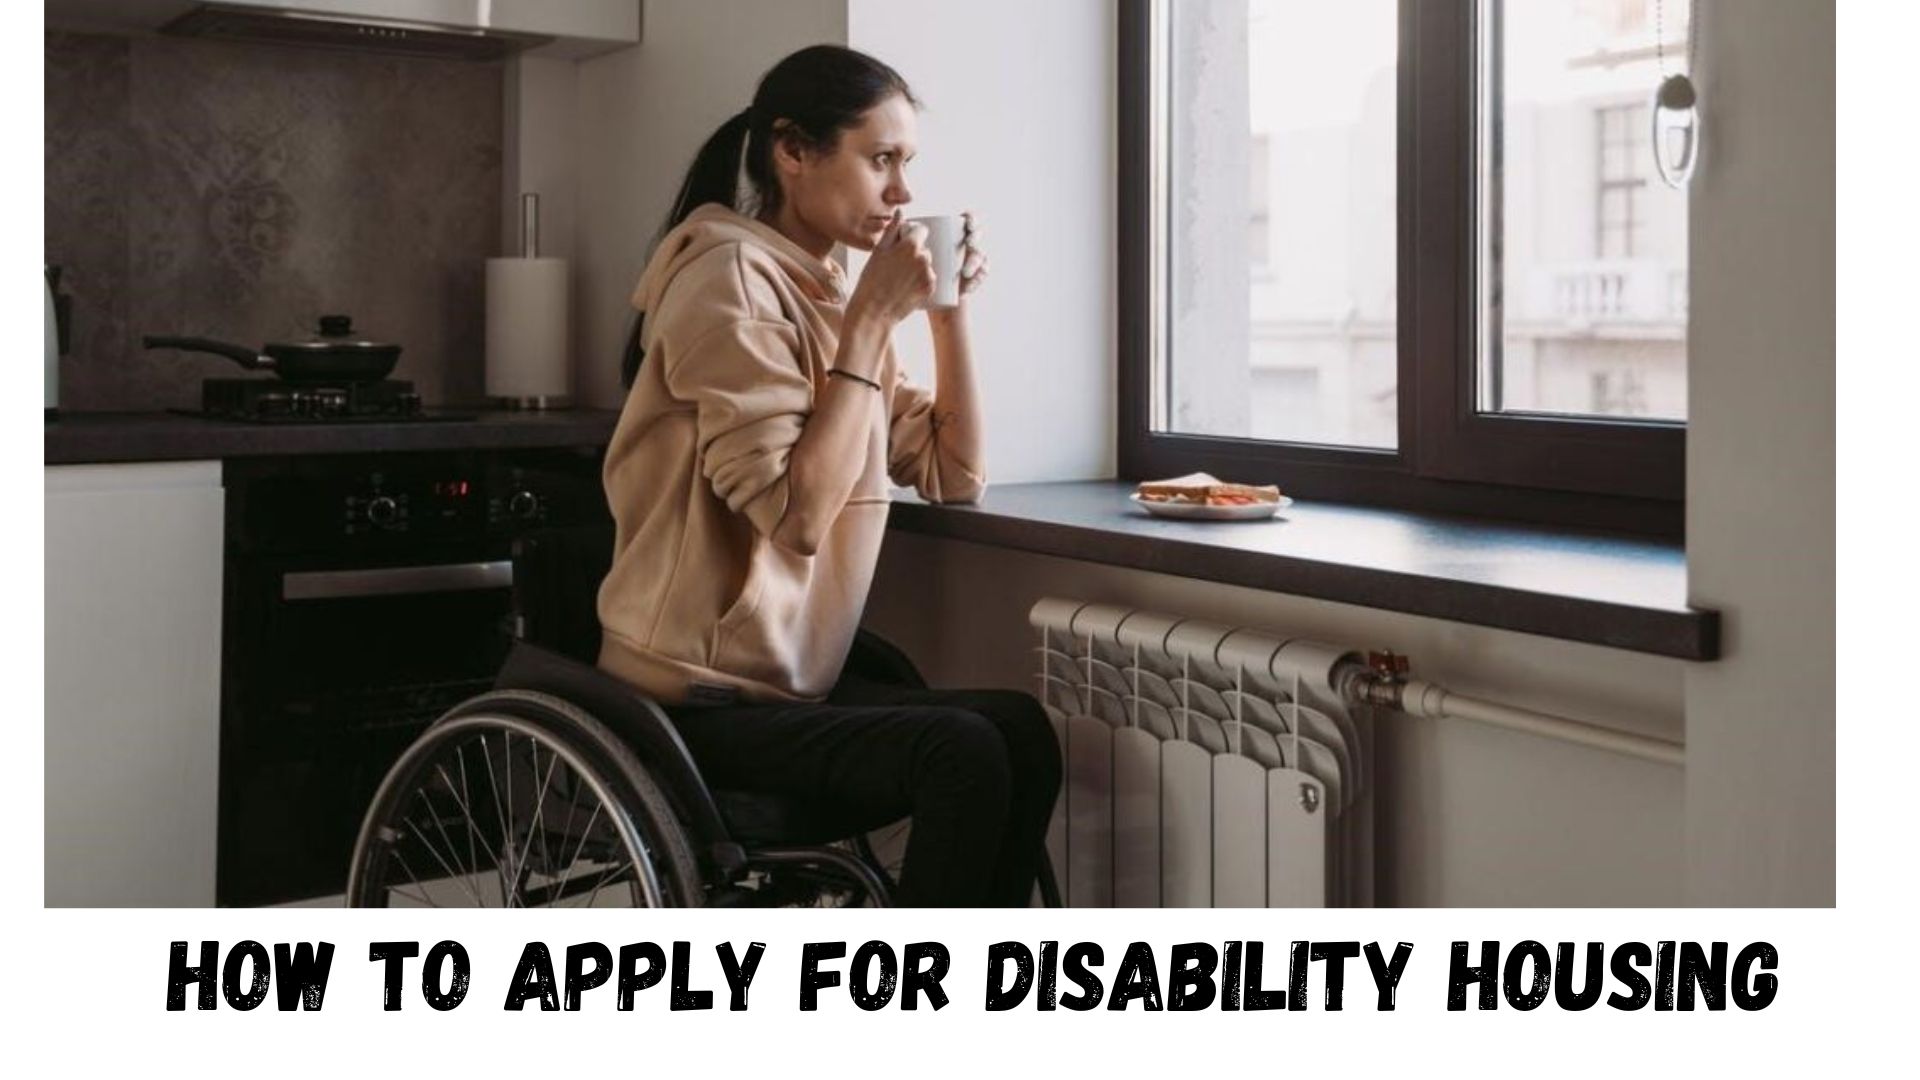 How to Apply for Disability Housing